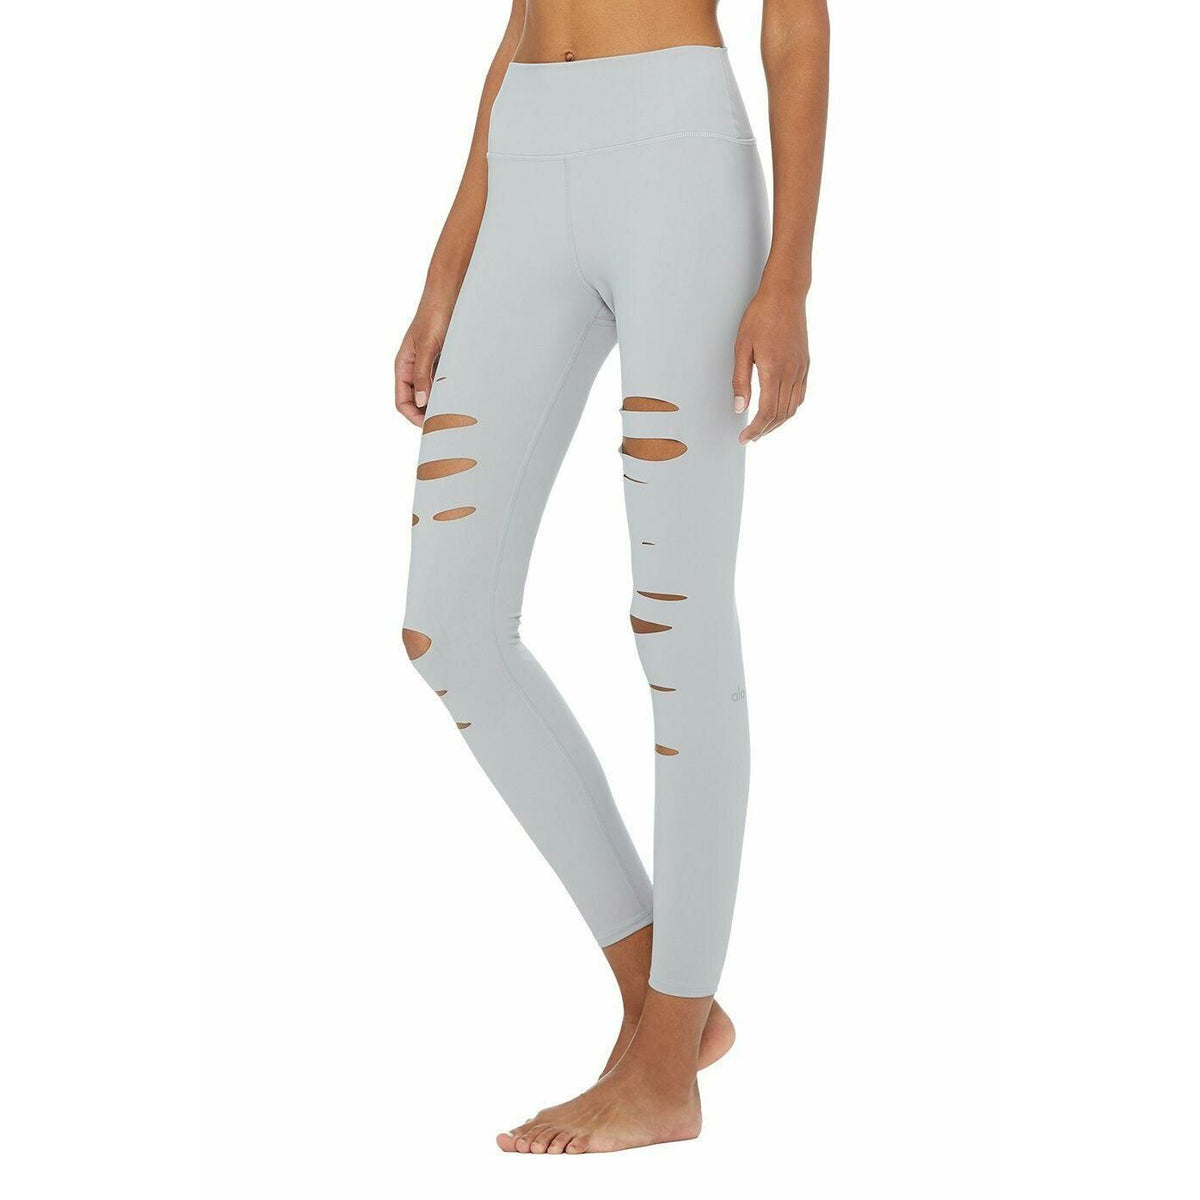 ALO GRAY HIGH-WAISTED RIPPED WARRIOR LEGGINGS SIZE